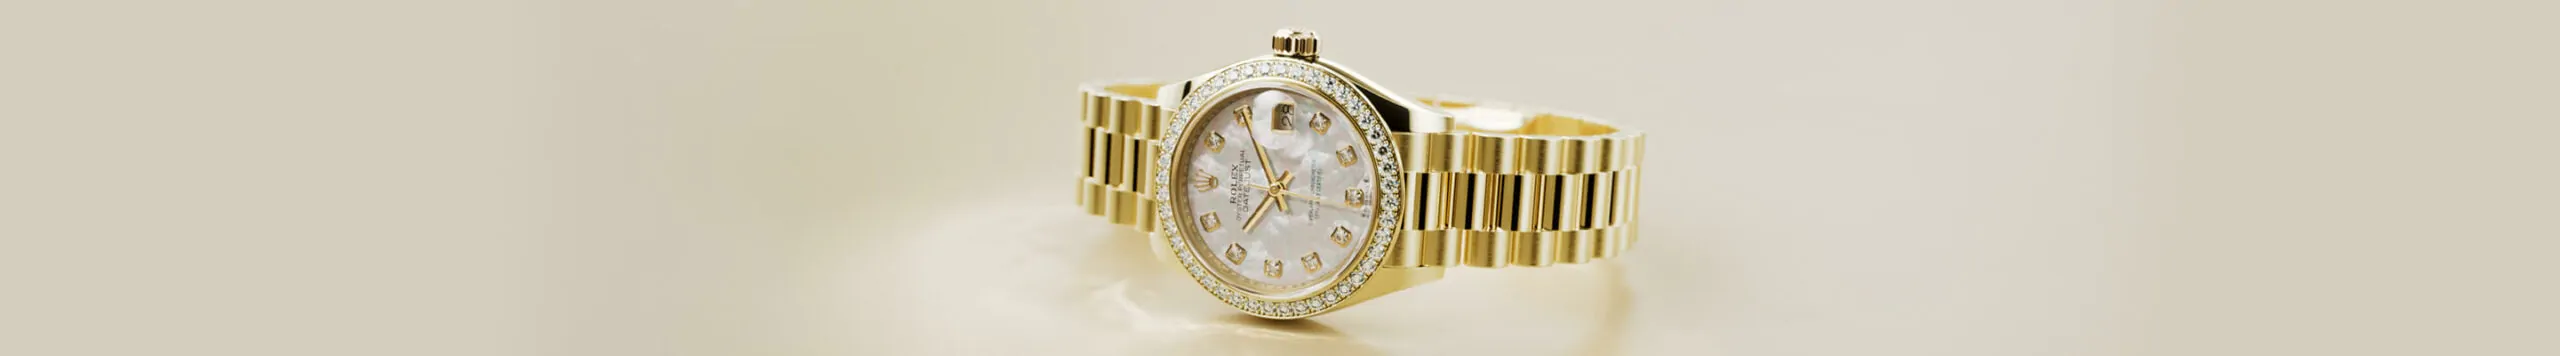 The Audacity of Excellence, The Lady-Datejust